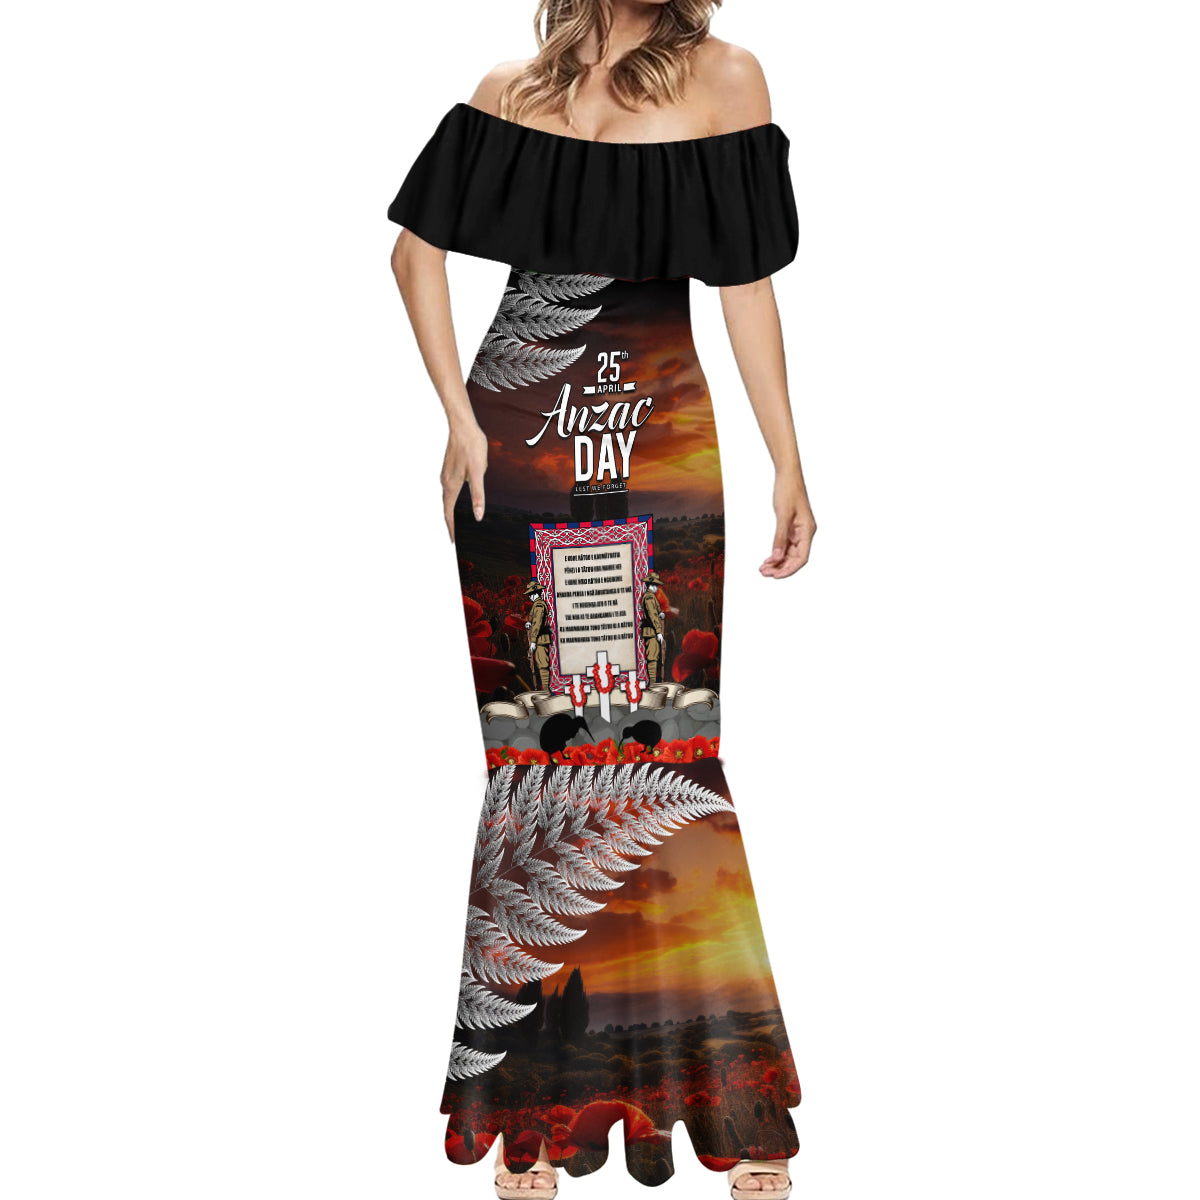 New Zealand ANZAC Day Mermaid Dress The Ode of Remembrance and Silver Fern